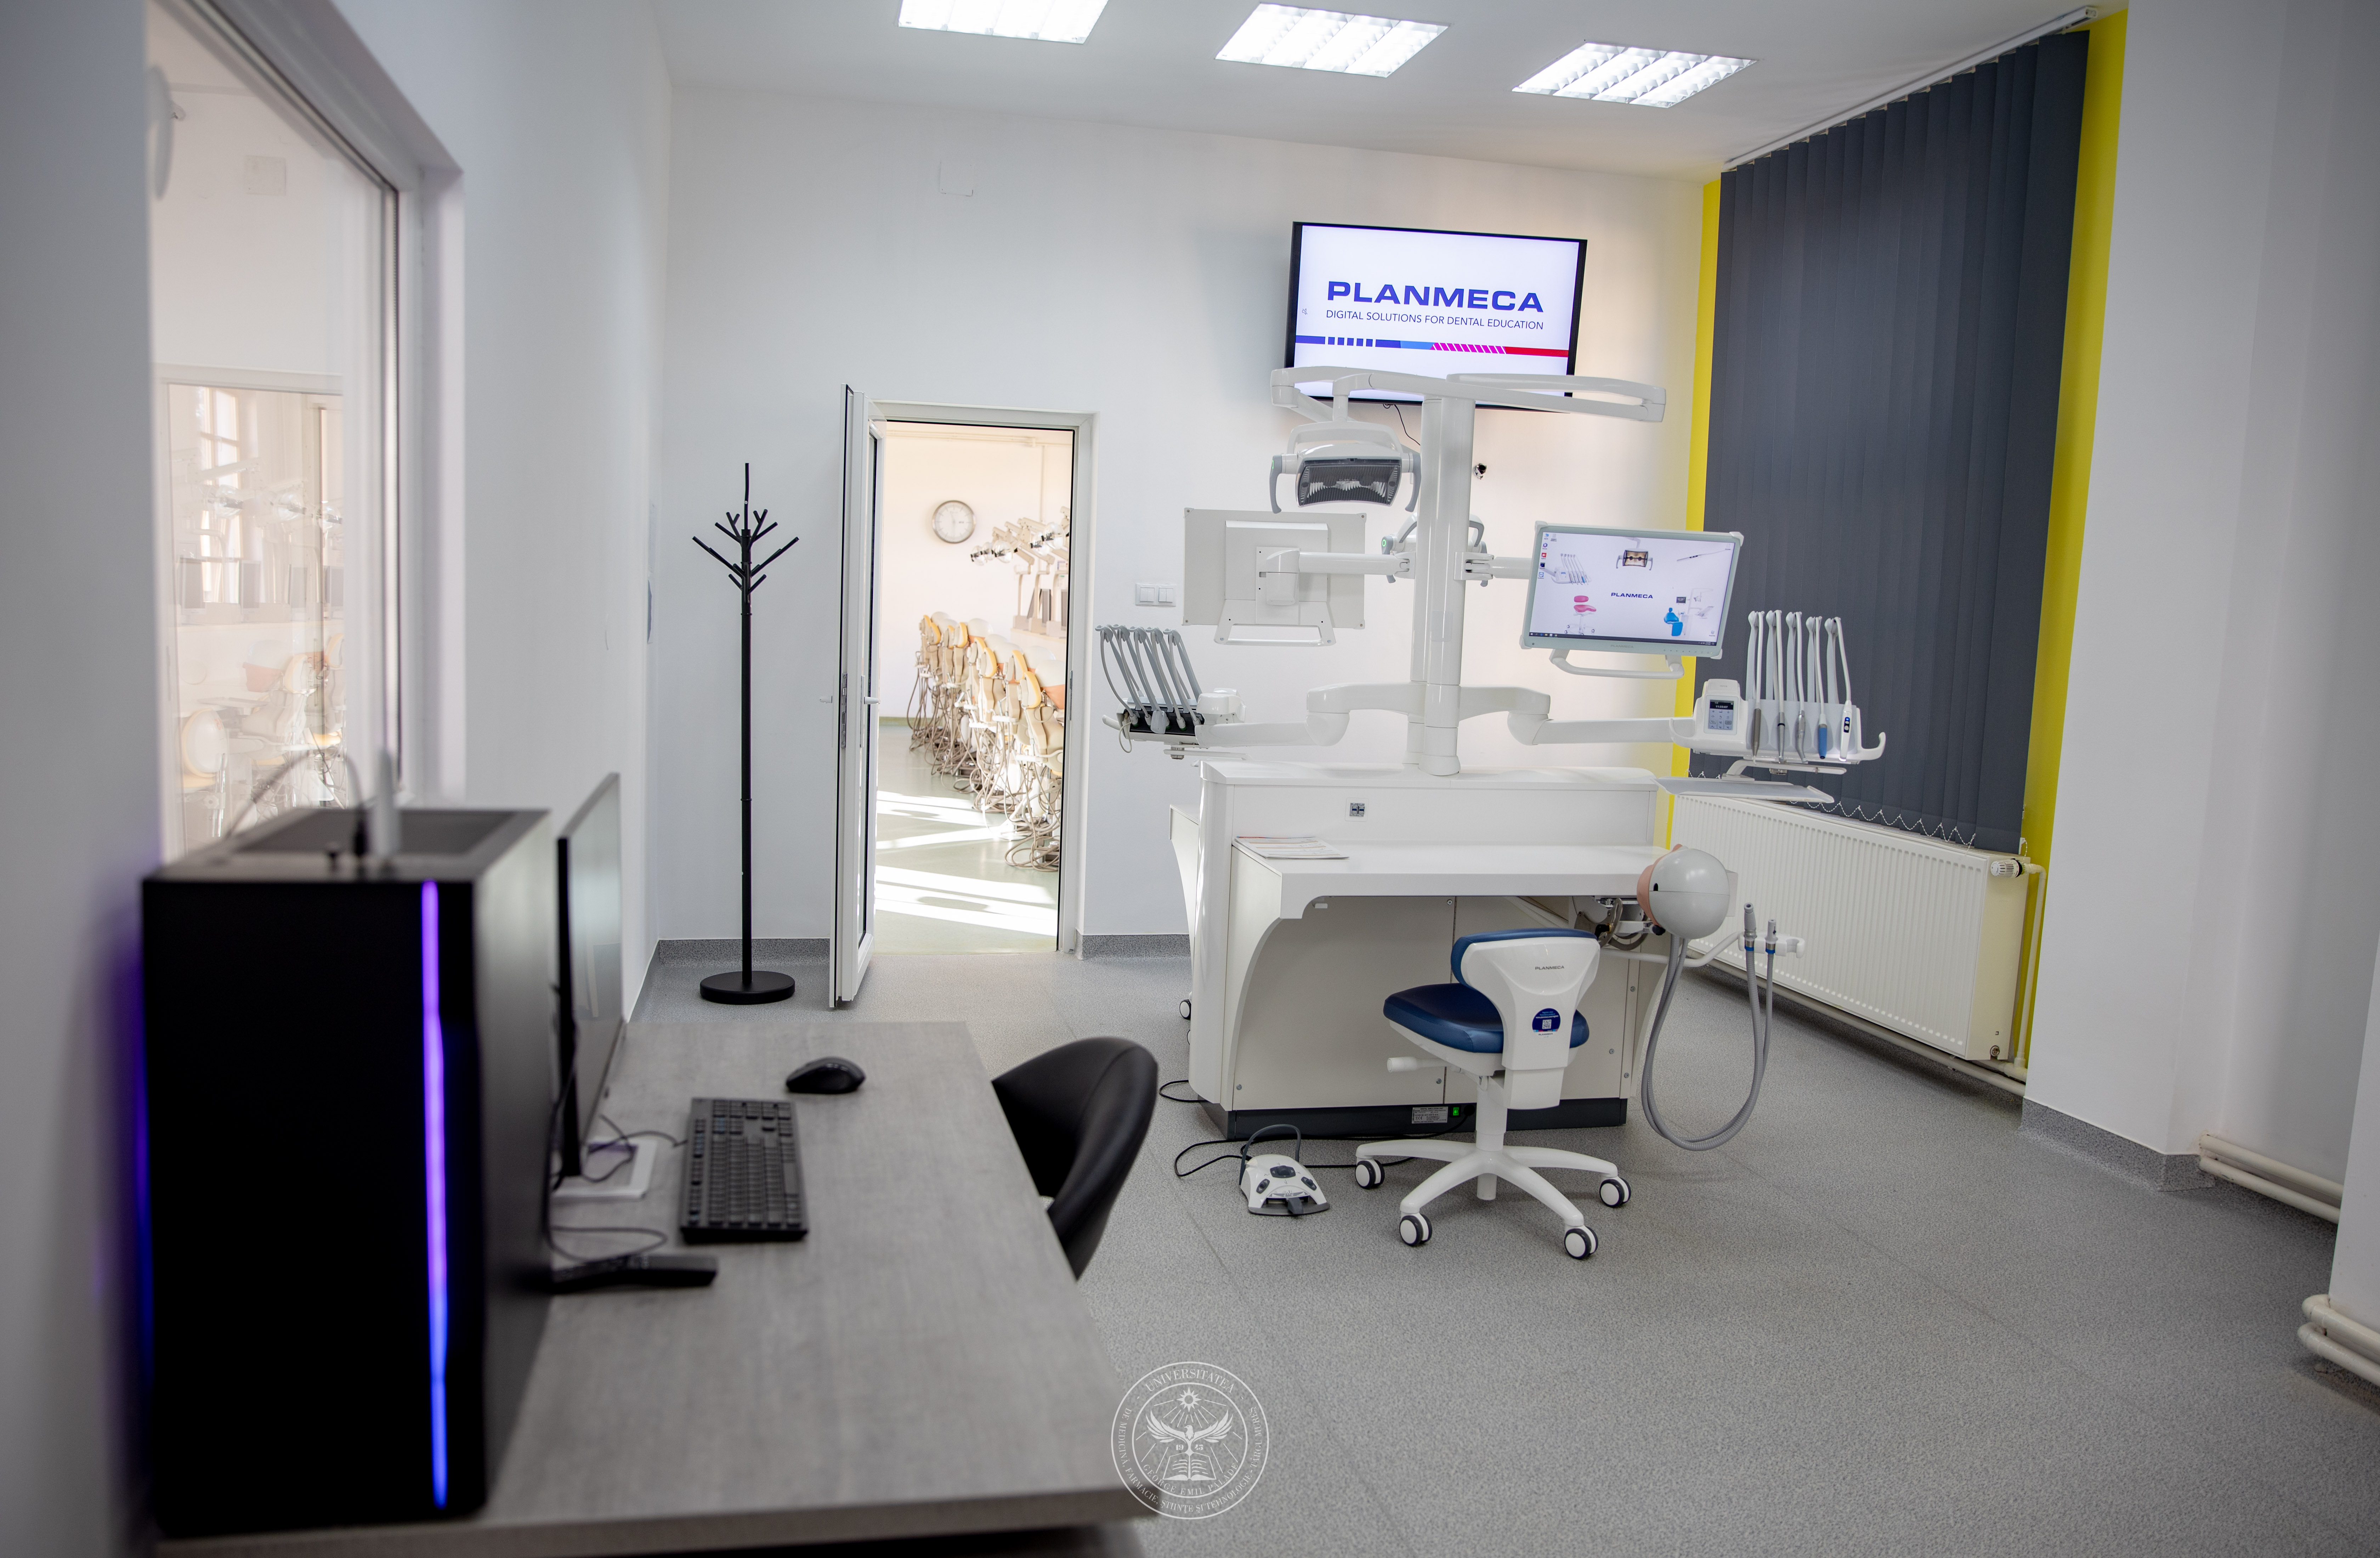 First Planmeca simulation units in Romania offer new possibilities for dental education